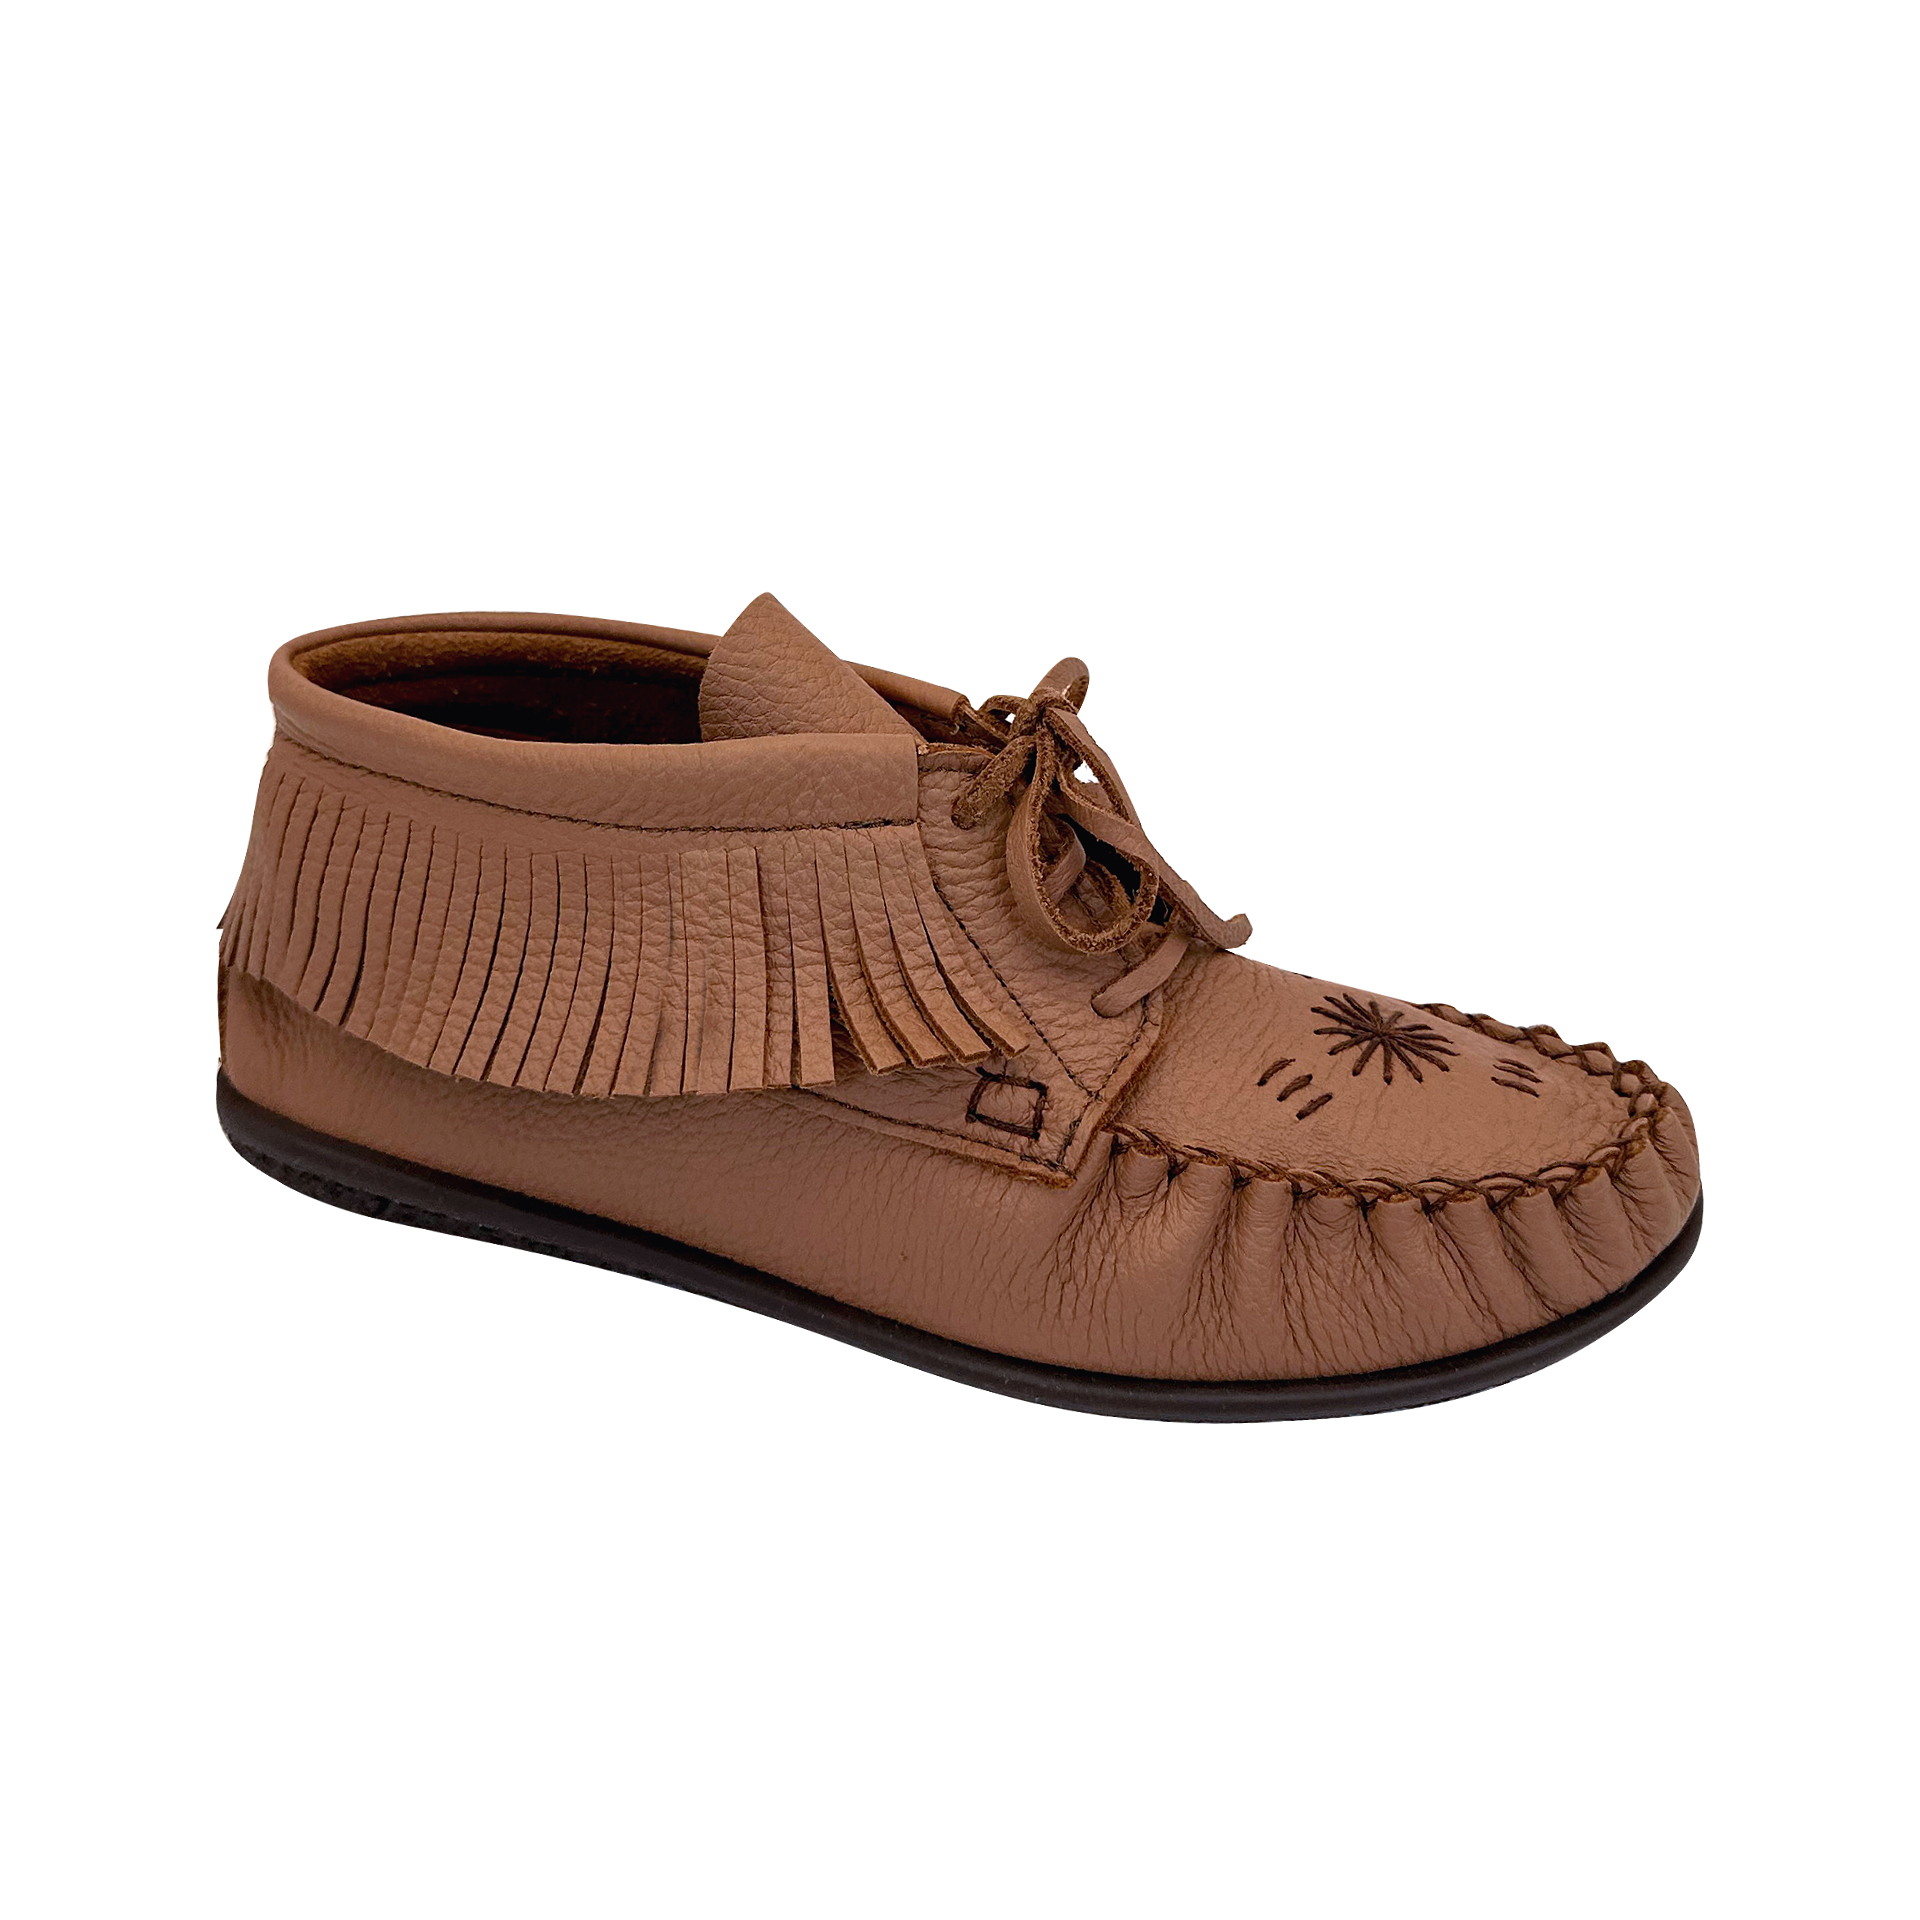 Women's Earthing Moccasin Shoes with Copper Rivet (Final Clearance)